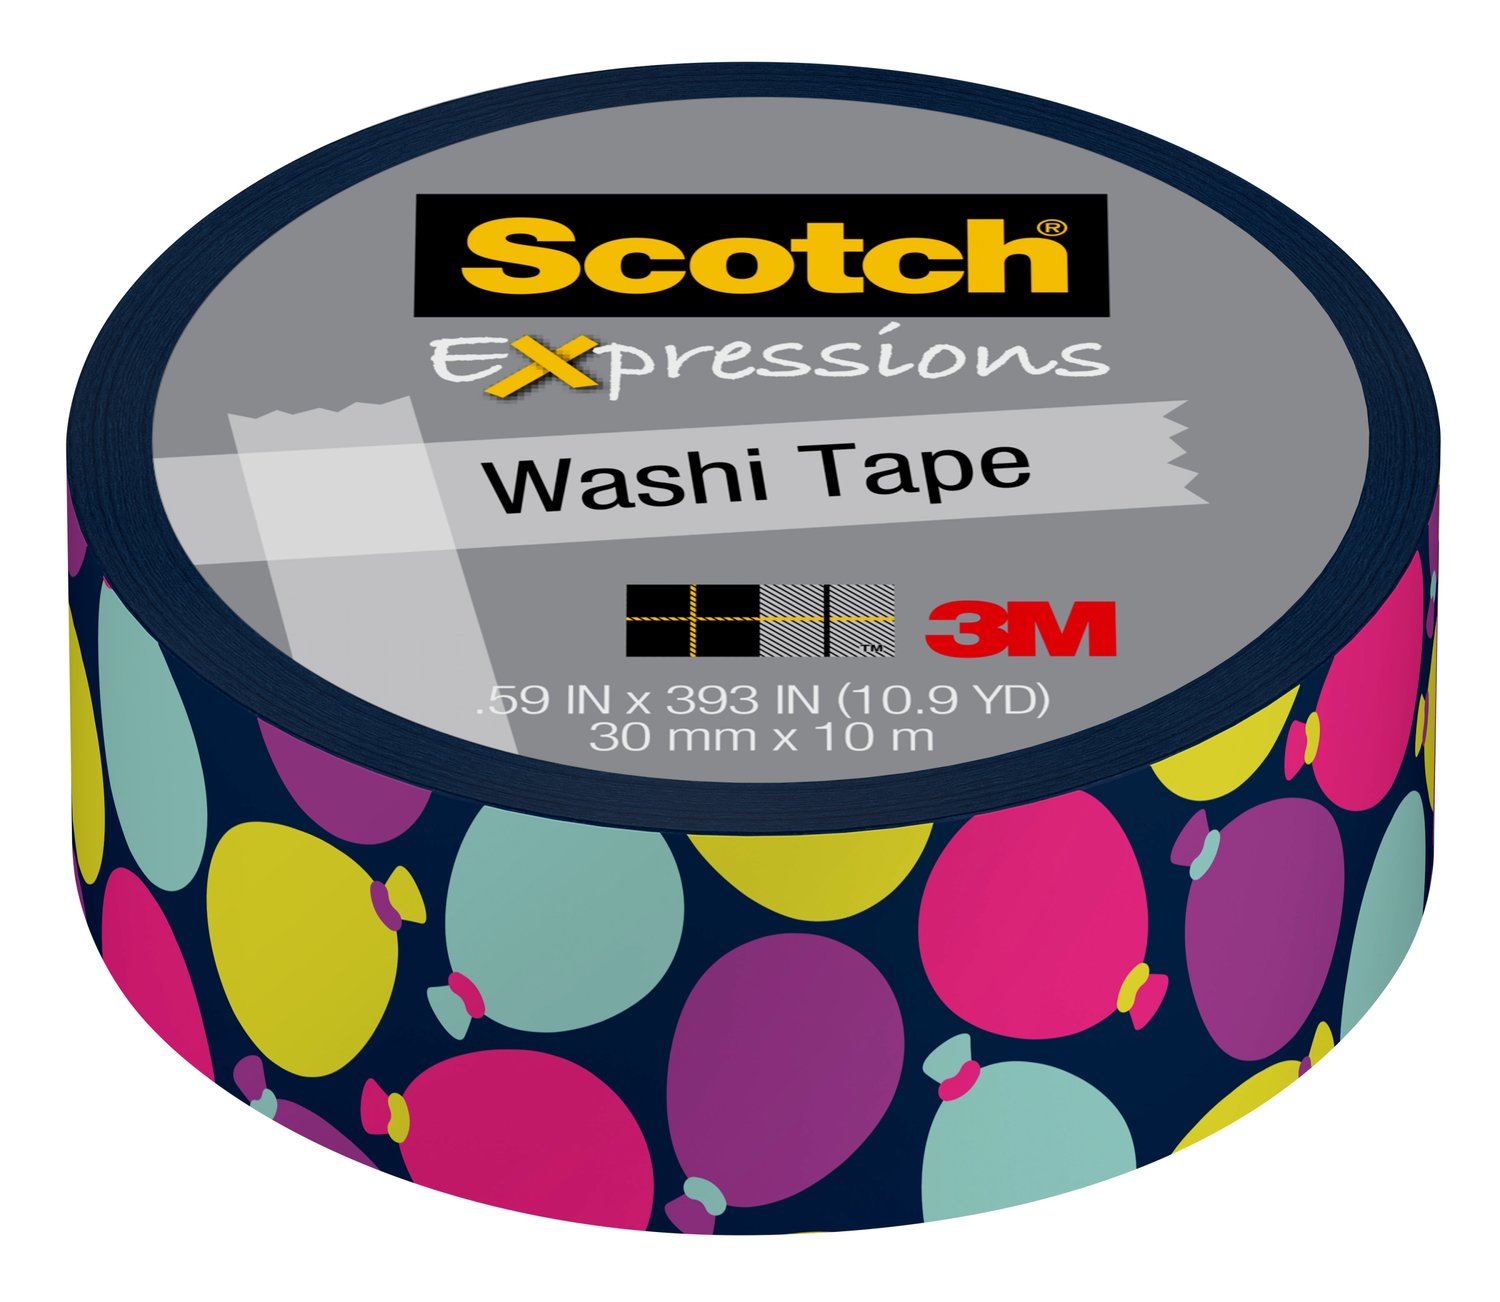 7100078334 - Scotch Expressions Washi Tape C314-P86, .59 in x 393 in (15 mm x 10 m),
Birthday Balloons